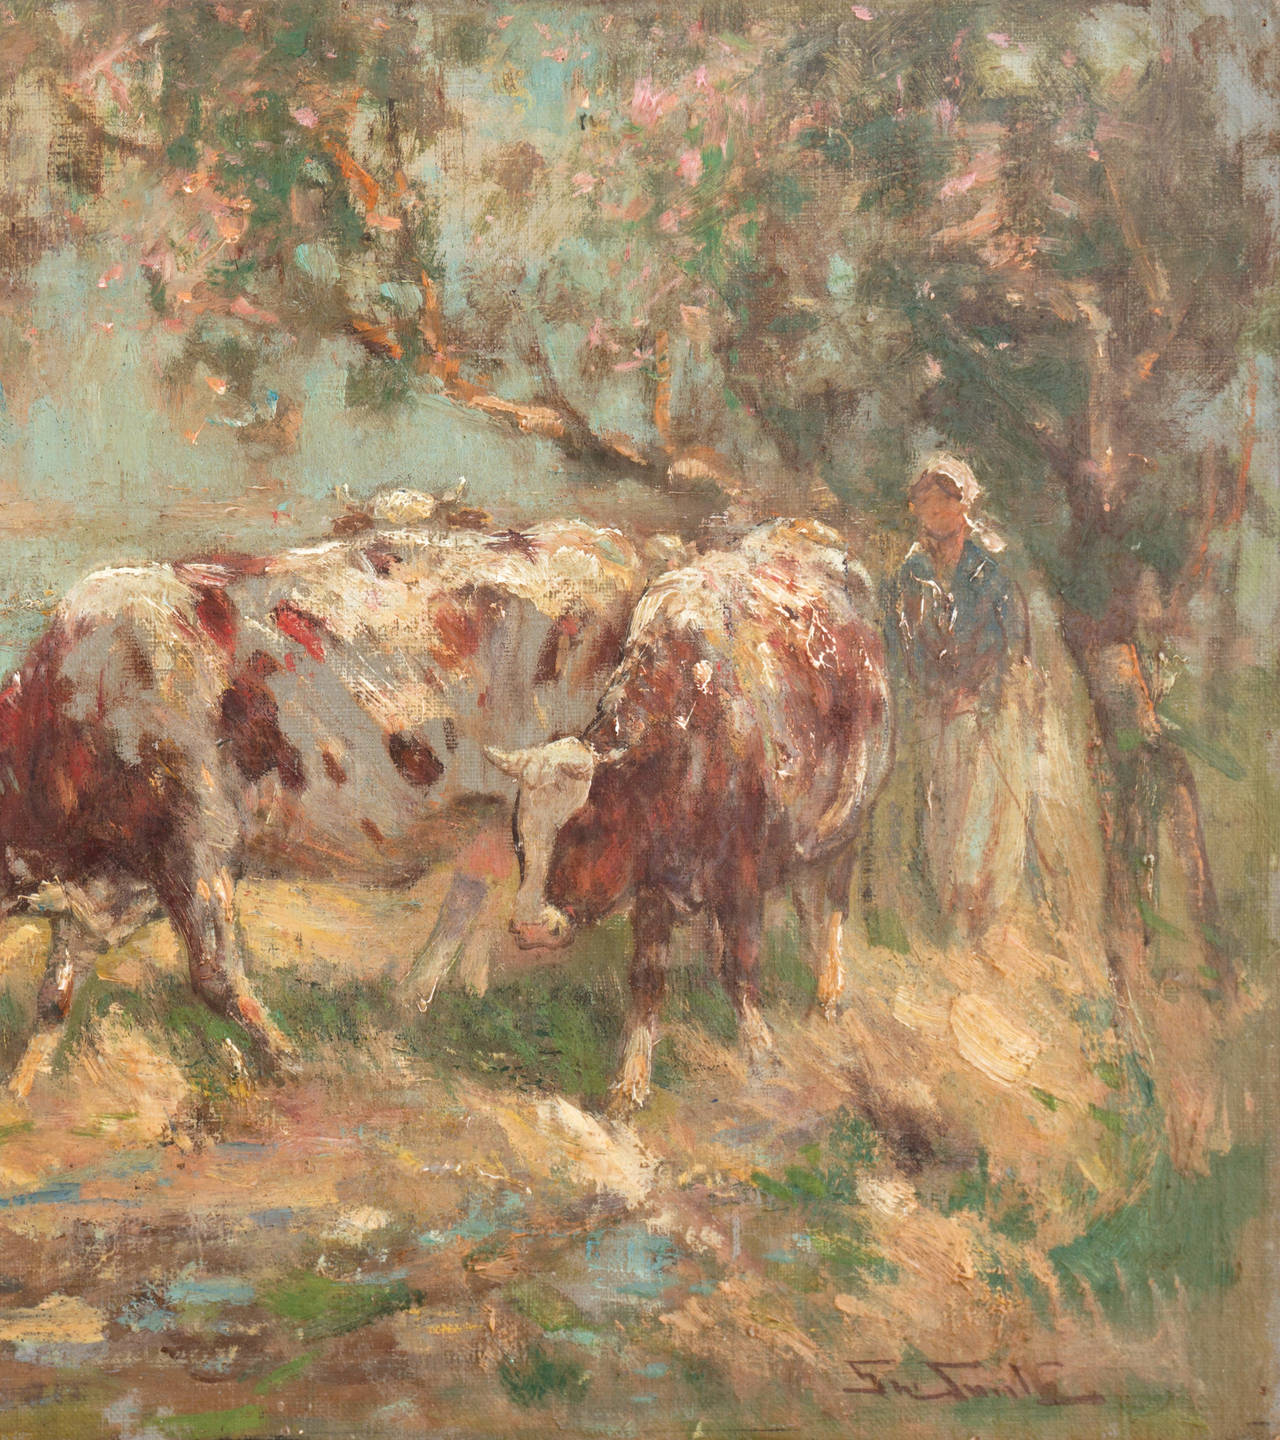 Cows in a Meadow   (Scottish, RSA, Genre, Rural, country) - Painting by George Smith b.1870